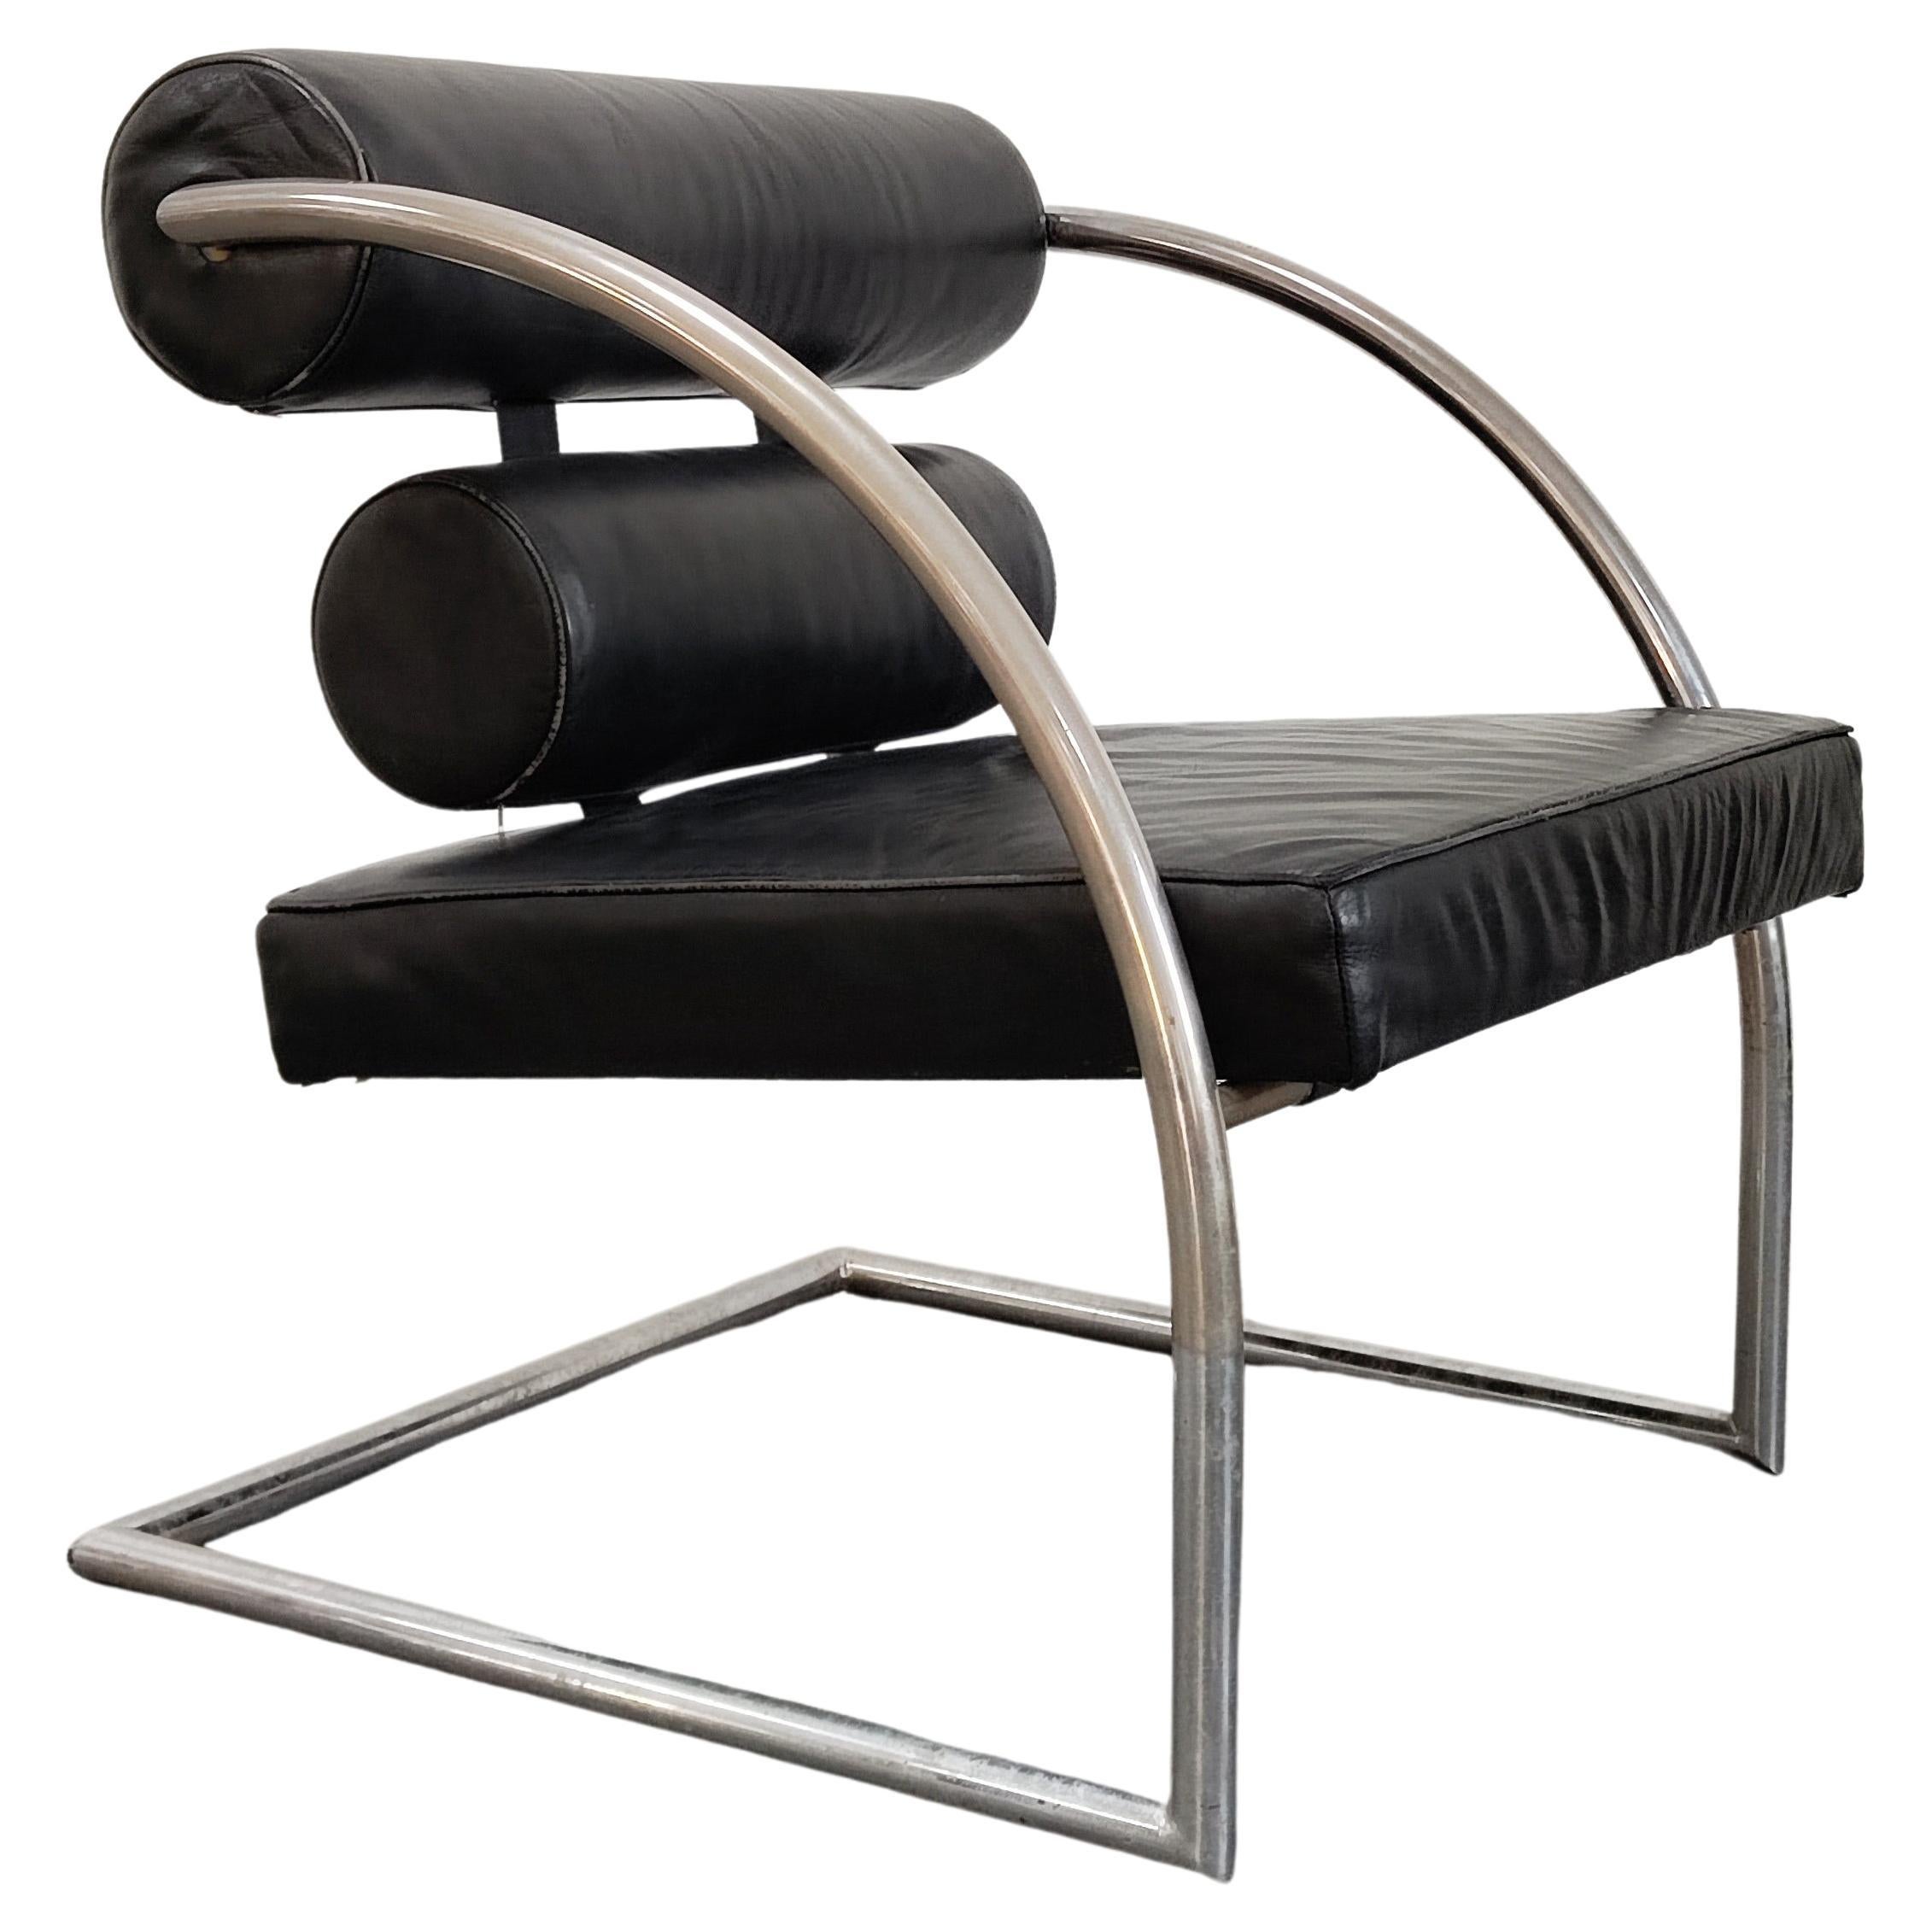 Bauhaus Style Leather Armchair with Chrome Tubular Frame, Switzerland, 1970s For Sale